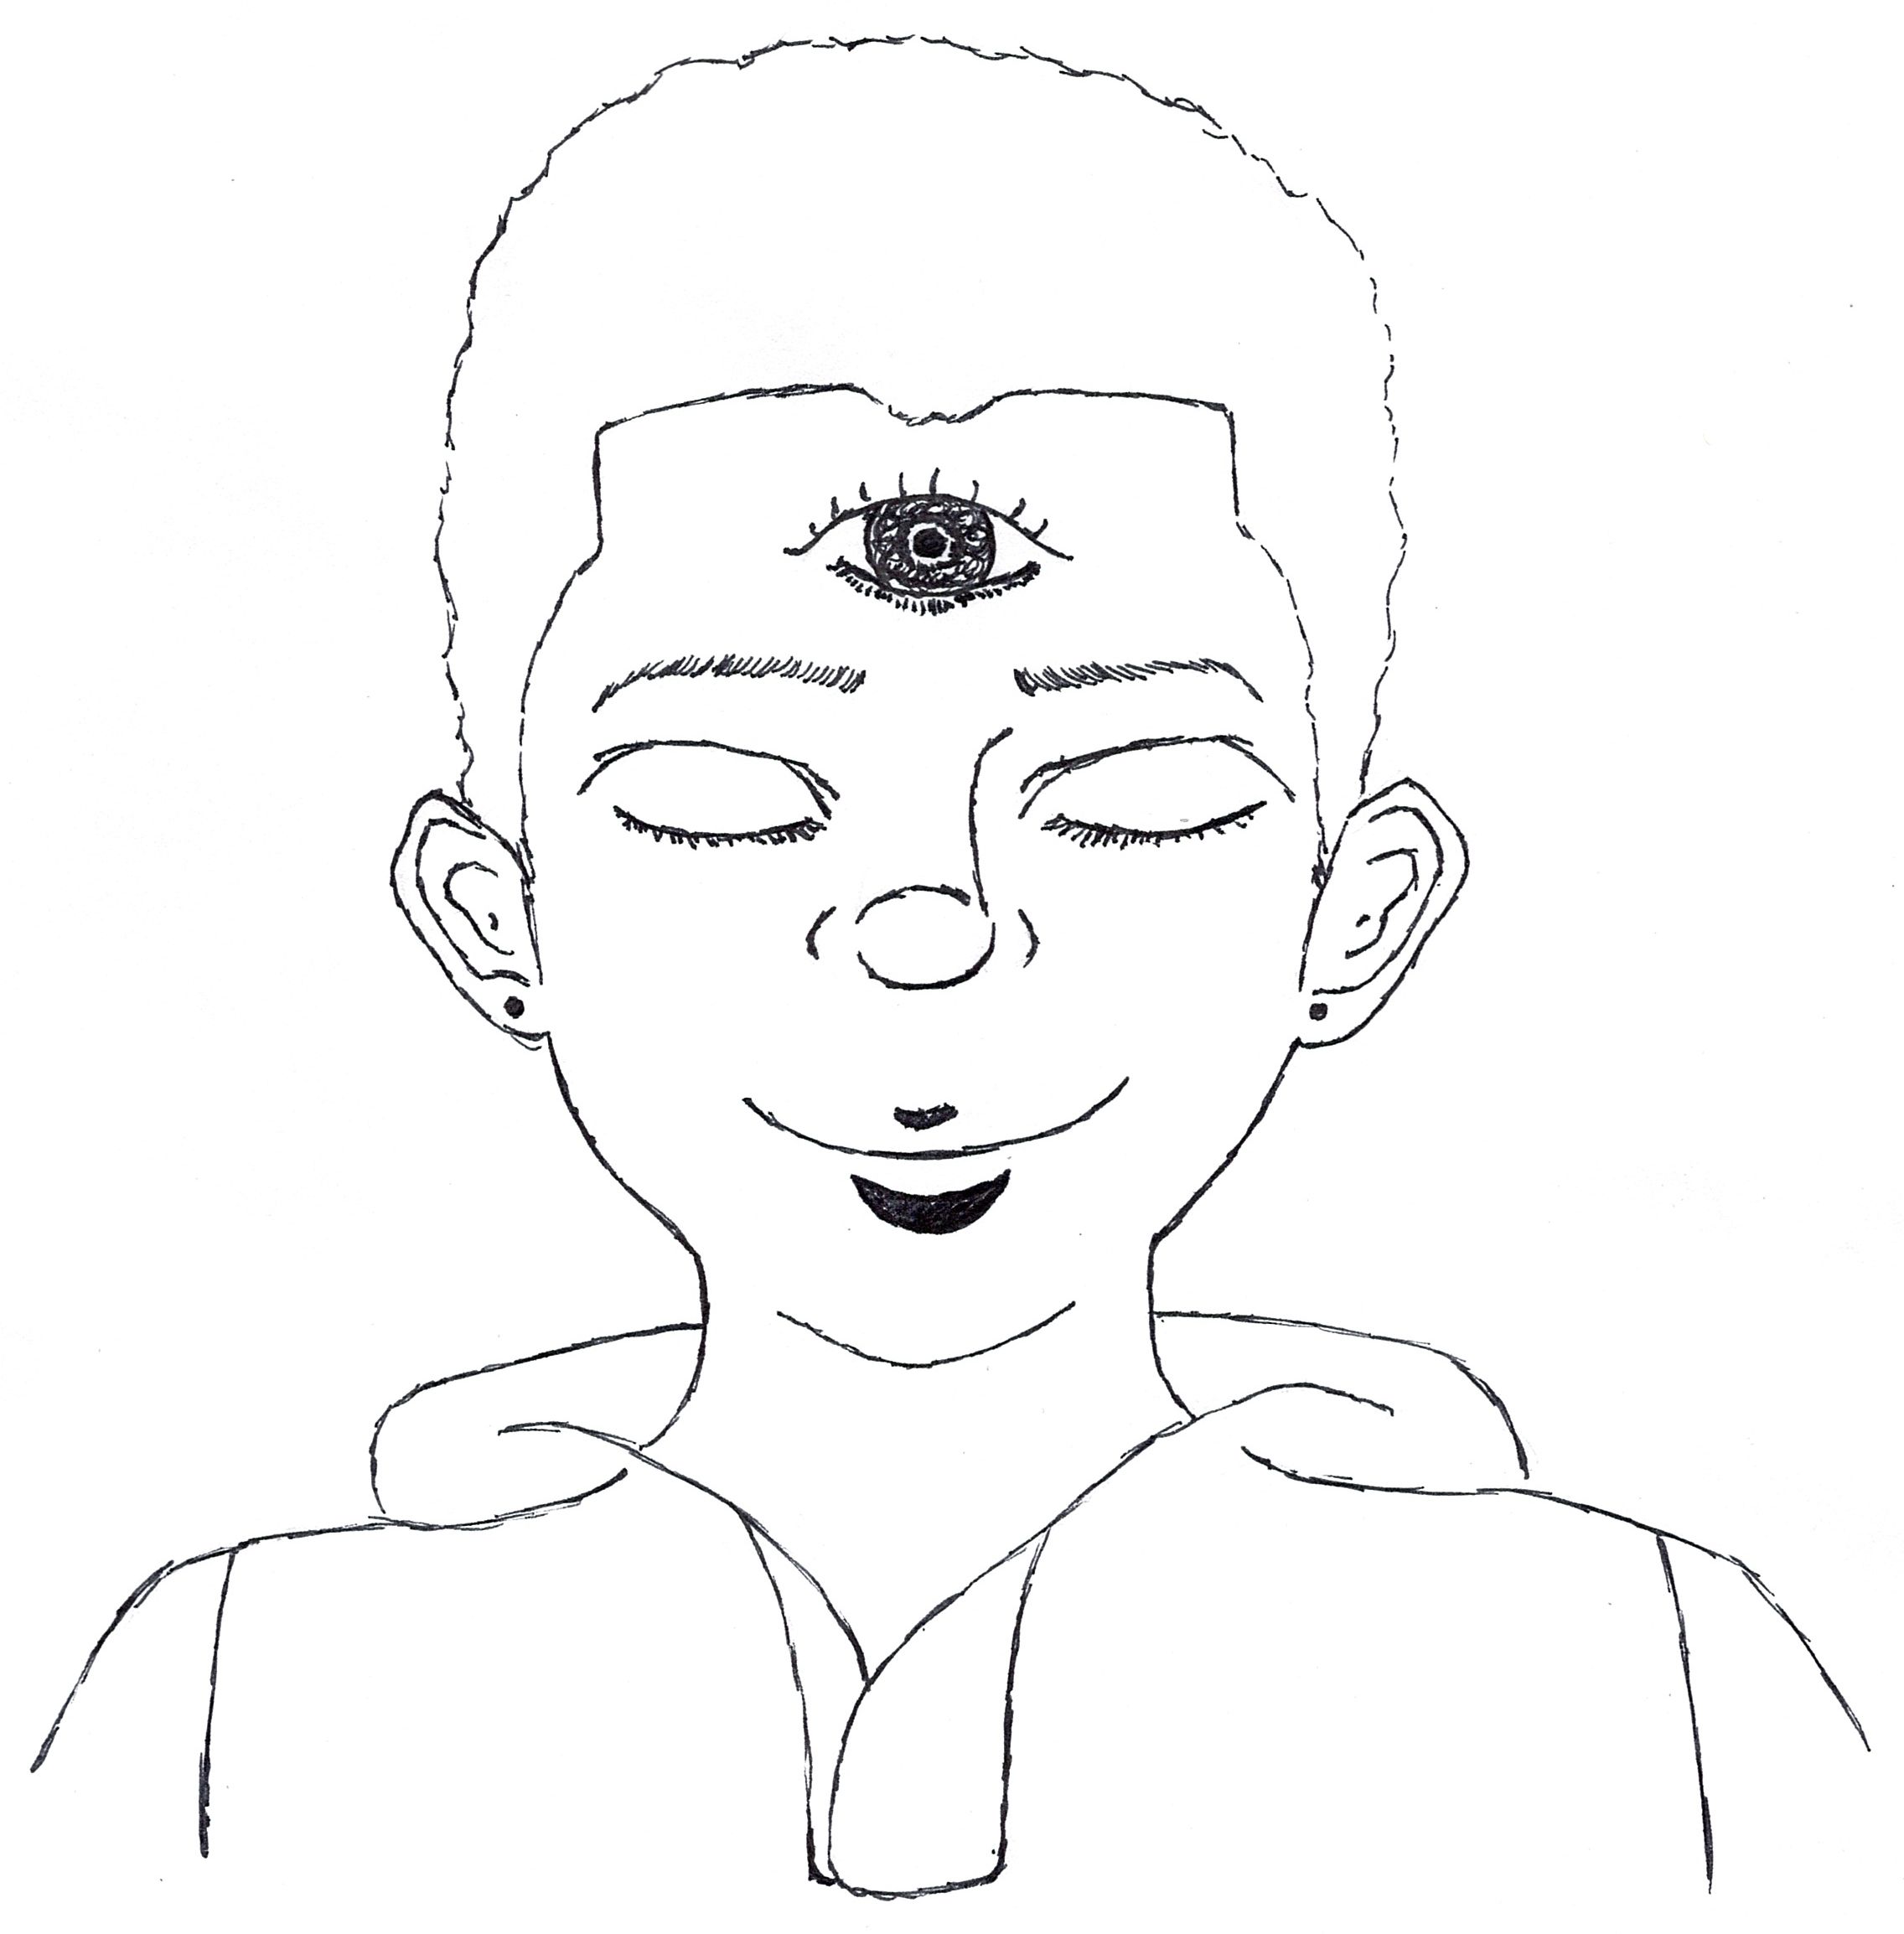 Drawing of a Young Man of Color with Eyes Closed in Meditation | A Third Eye Appears in the Middle of His Forehead